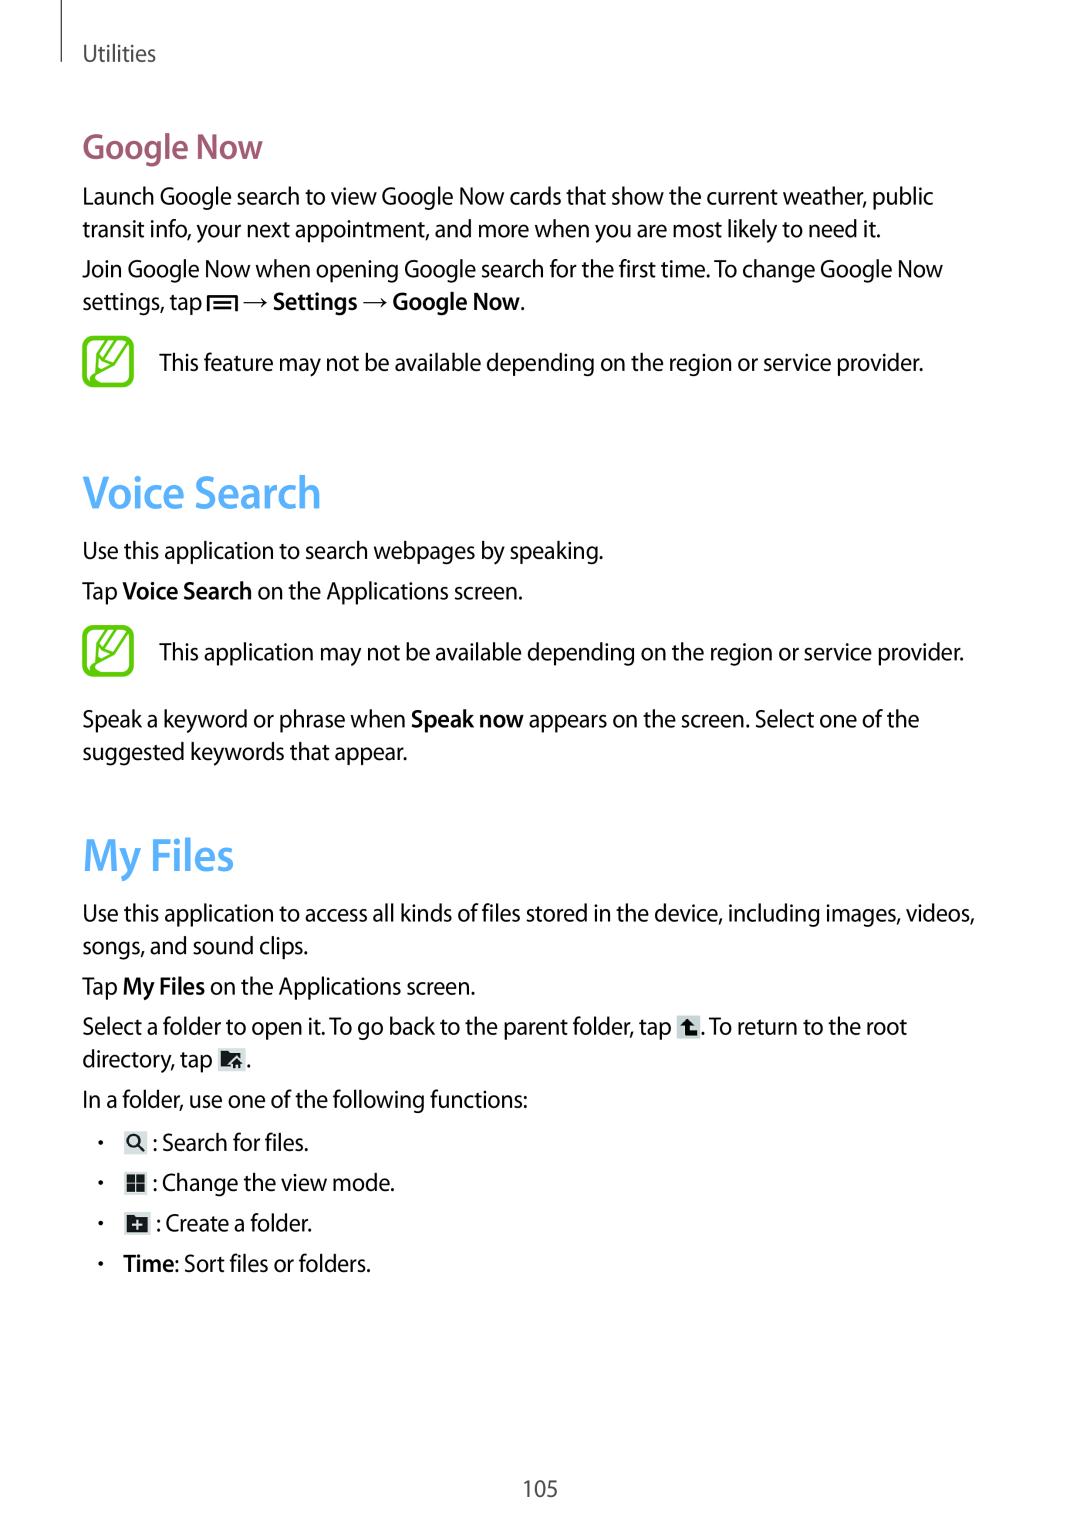 Samsung GT-N5100 user manual Voice Search, My Files, Google Now, Utilities 